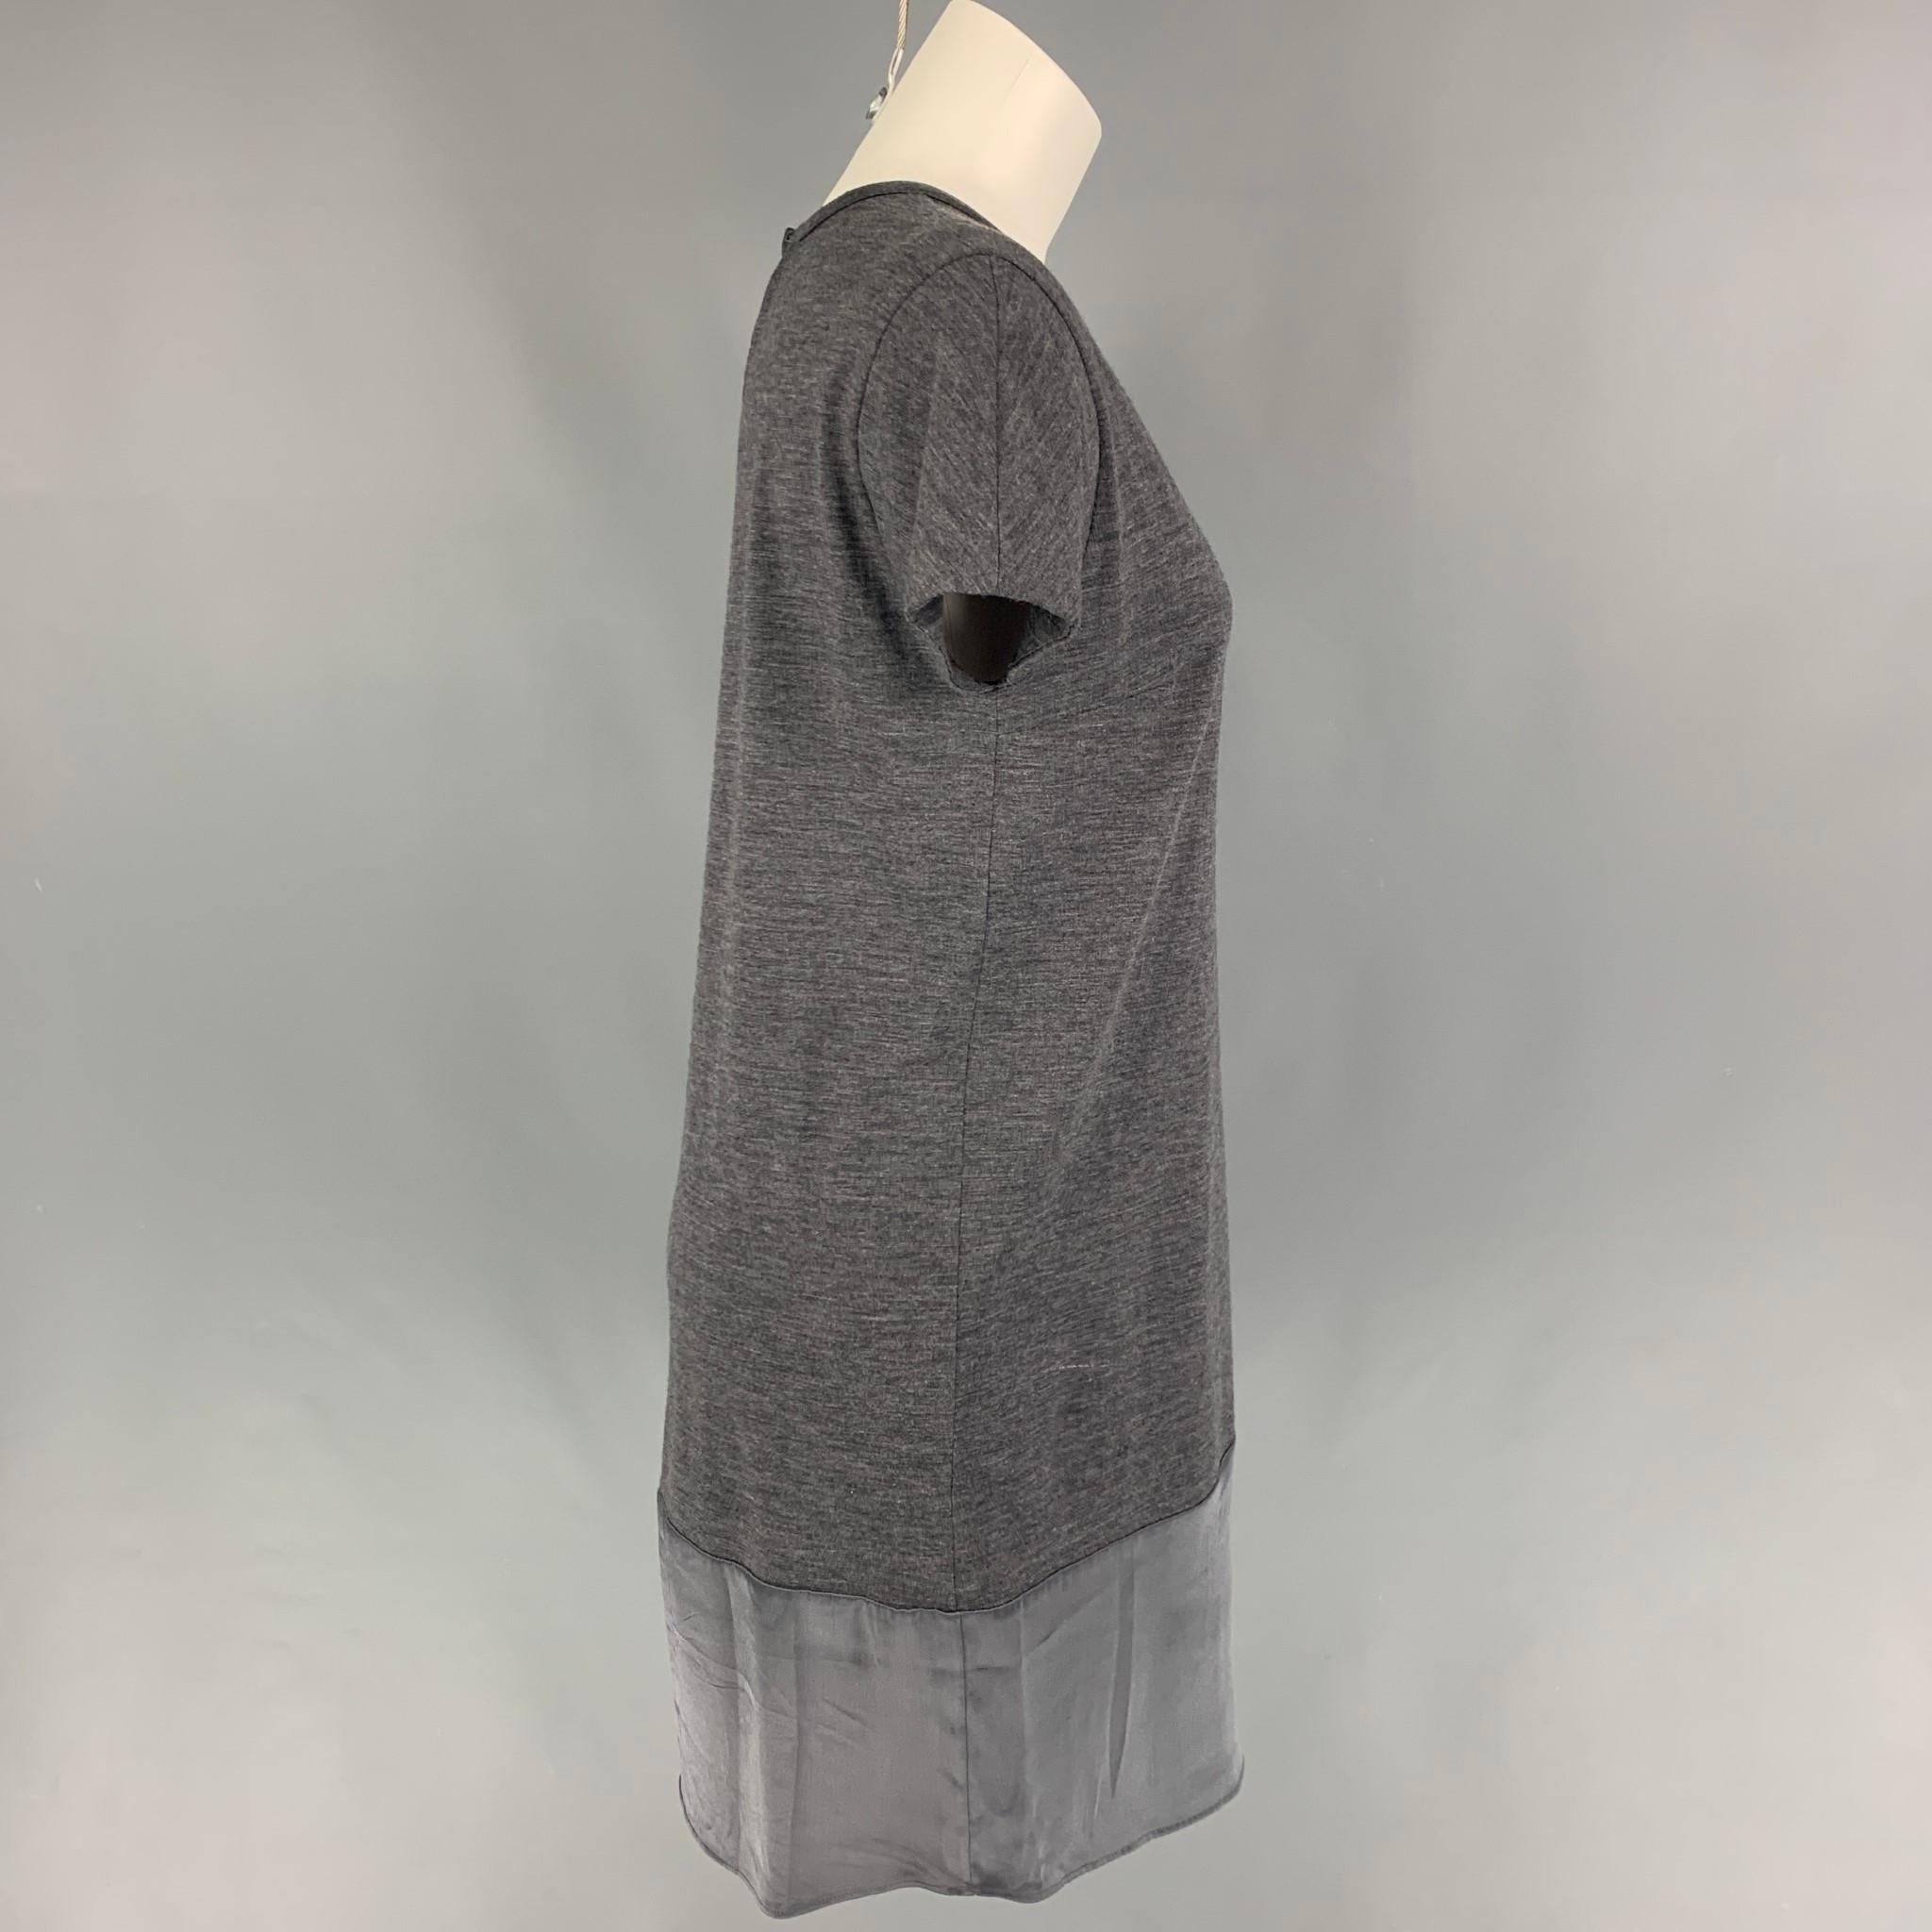 BRUNELLO CUCINELLI dress comes in a grey wool featuring a shift style, short sleeves, and a satin panel. Made in Italy. 

Very Good Pre-Owned Condition.
Marked: M

Measurements:

Shoulder: 16.5 in.
Bust: 38 in.
Hip: 38 in.
Sleeve: 6.5 in.
Length: